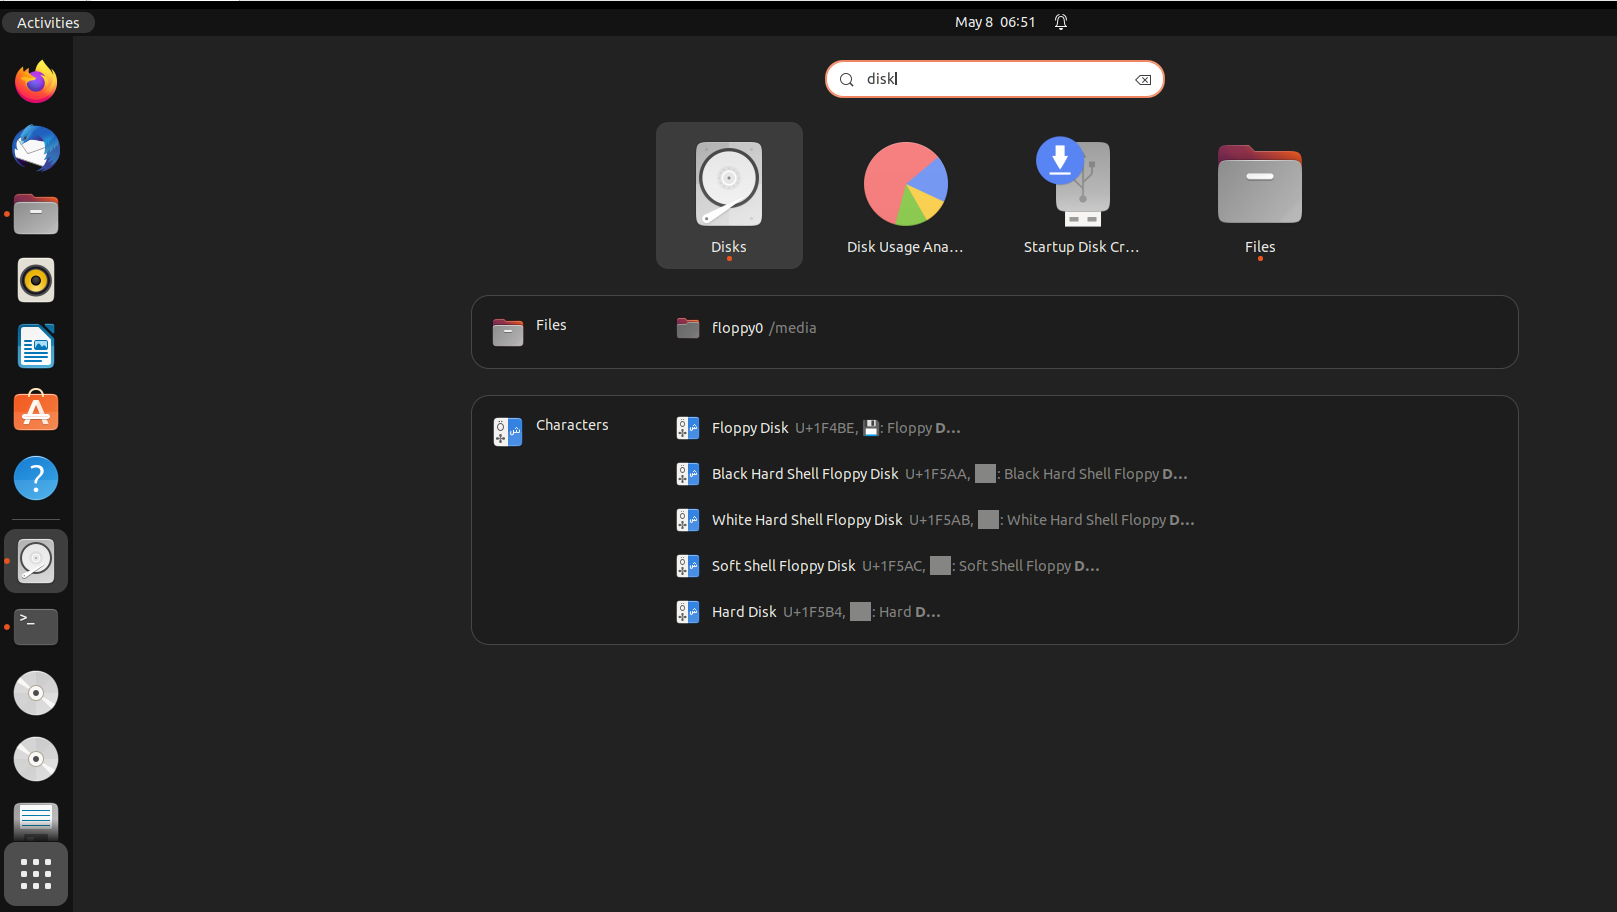 Find the GNOME Disks utility by typing “disks” into the GNOME search bar